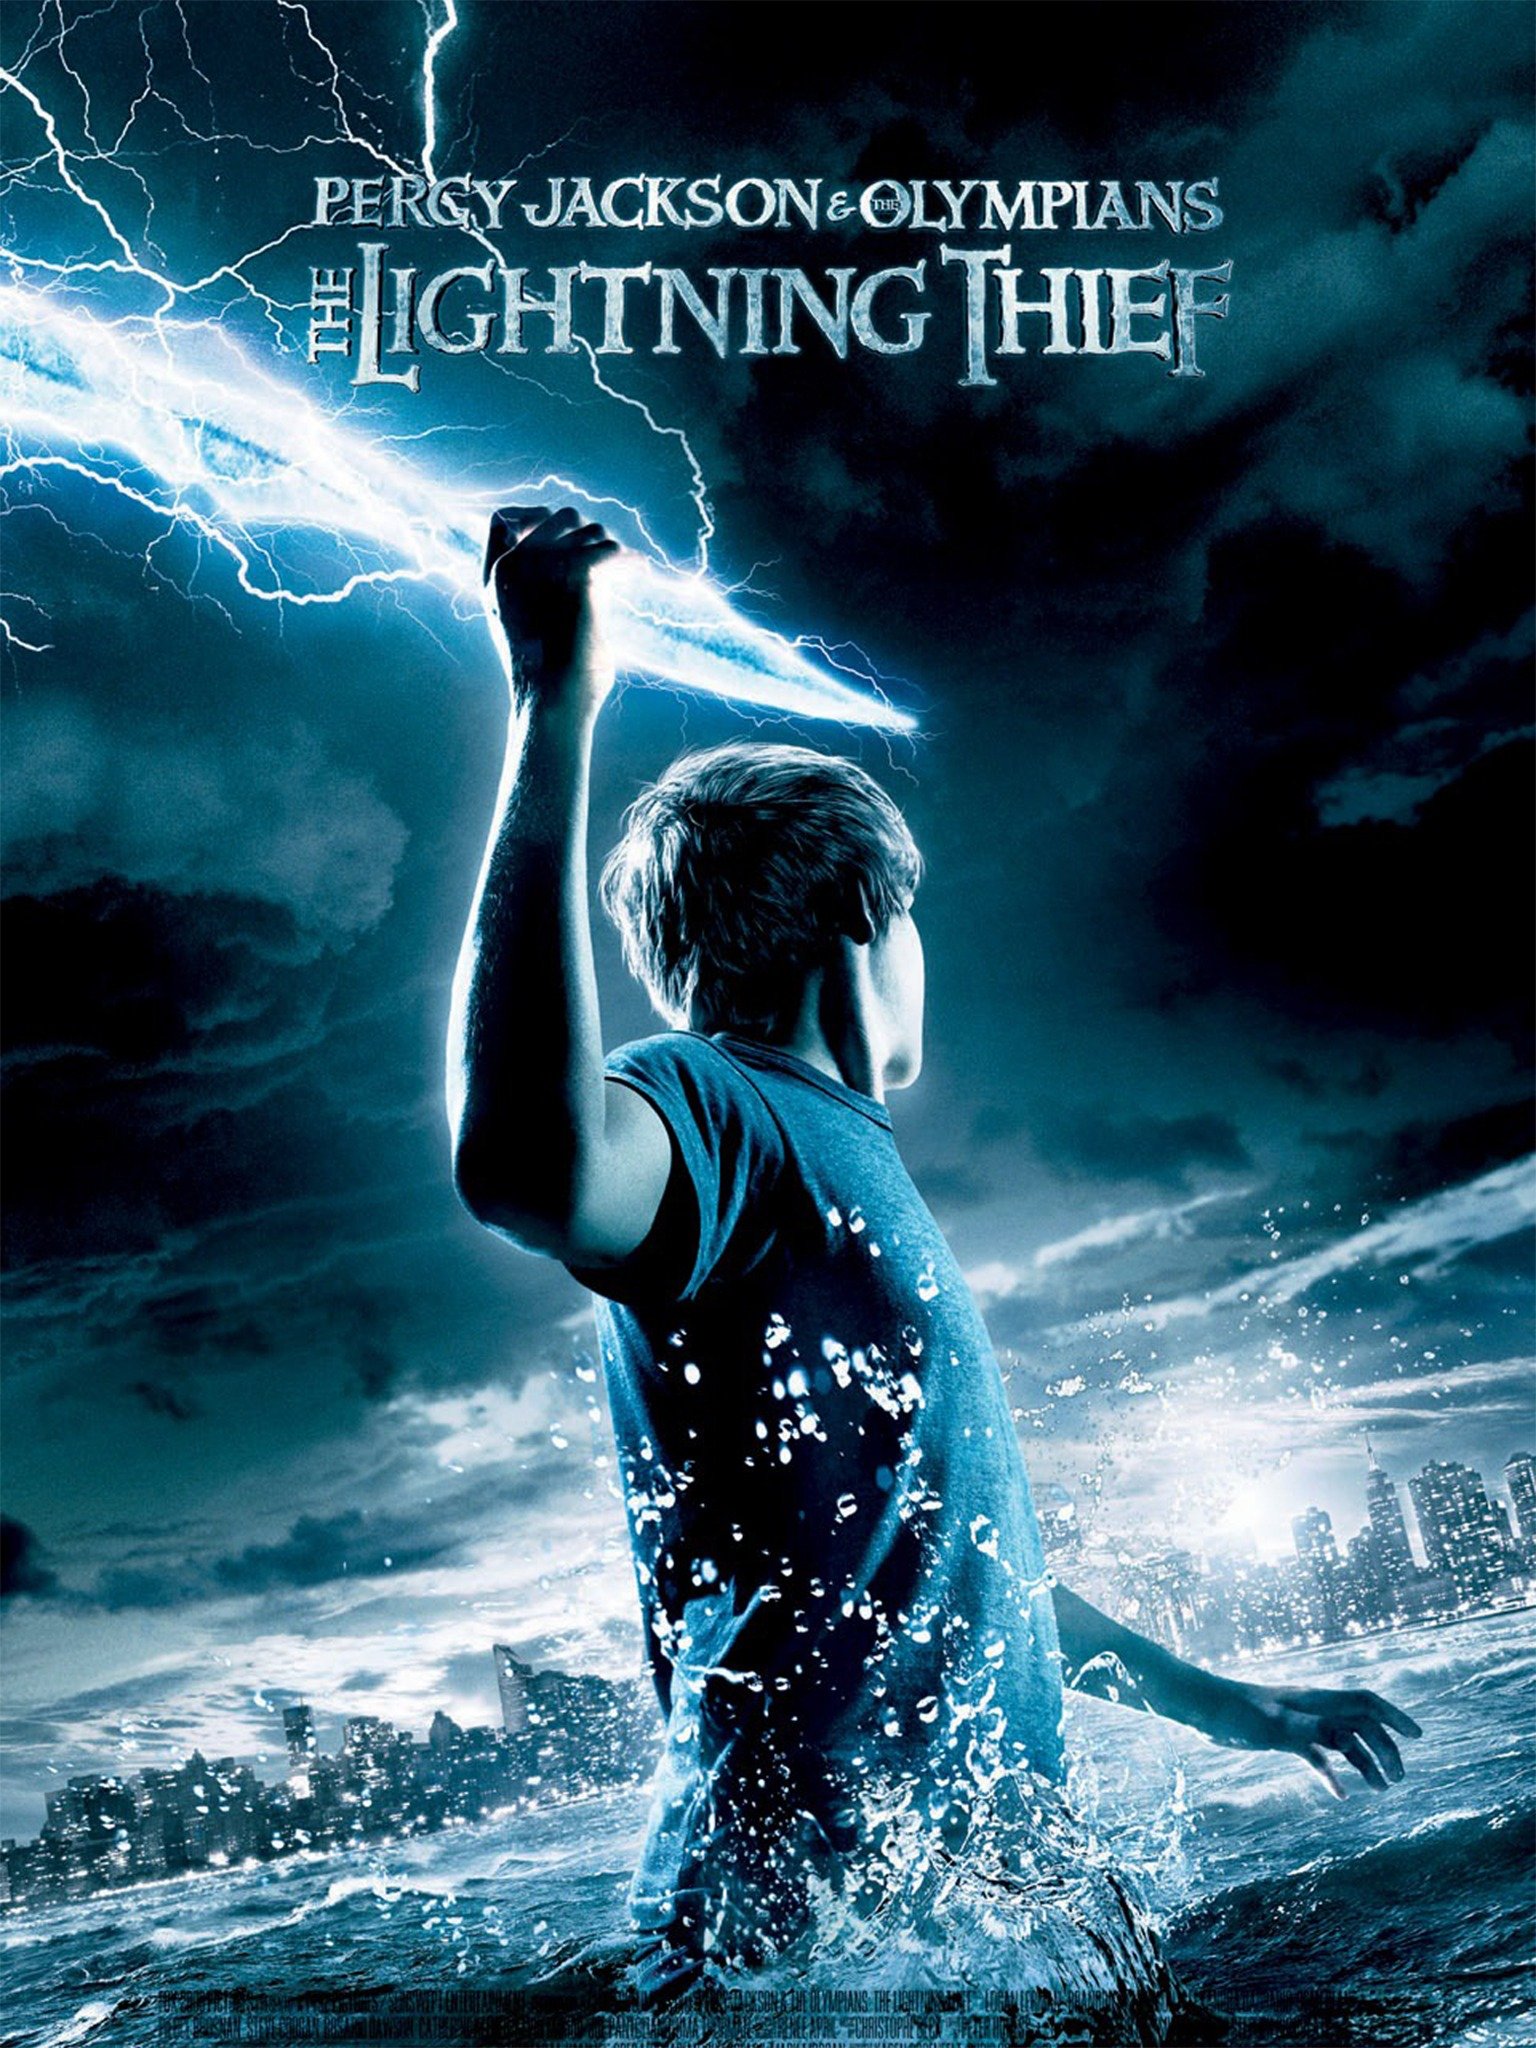 Percy Jackson The Olympians The Lightning Thief 2010 Full Movie Online In Hd Quality